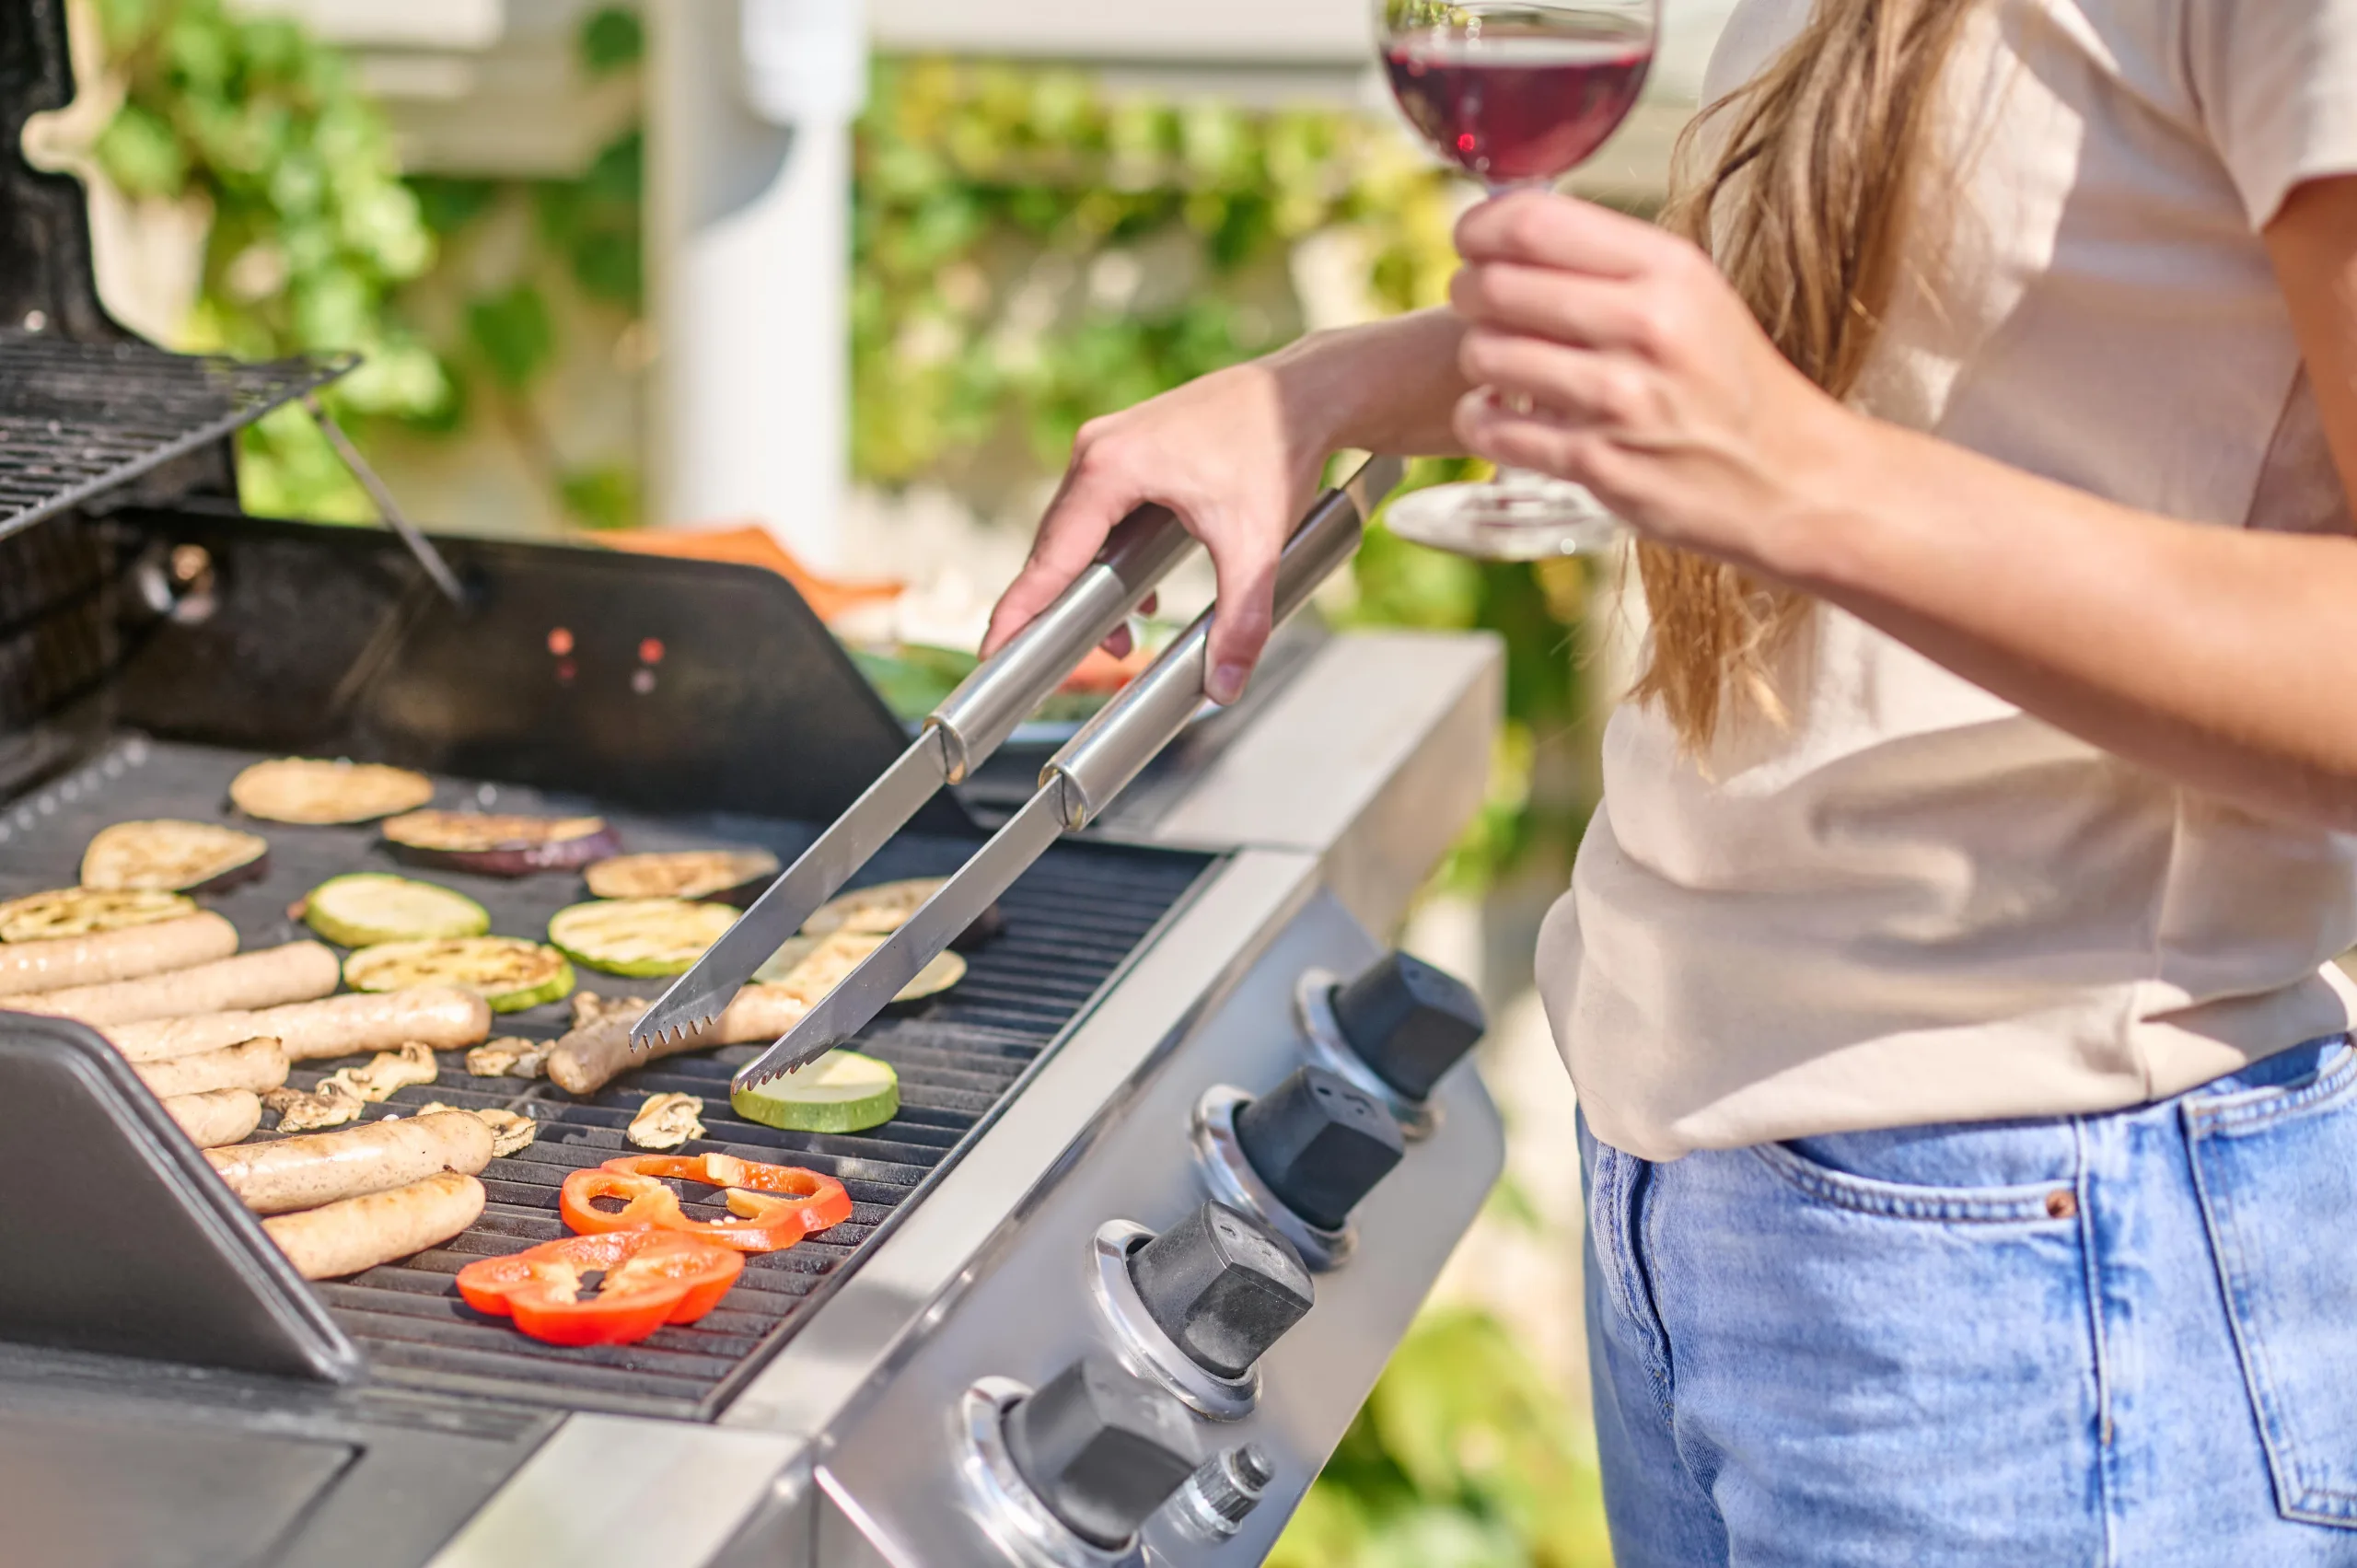 Woman grilling turning sausages and vegetables over with metal tongs. She is holding a glass of red wine, there is green foliage behind her, and she is wearing a loose t-shirt and denim jeans.